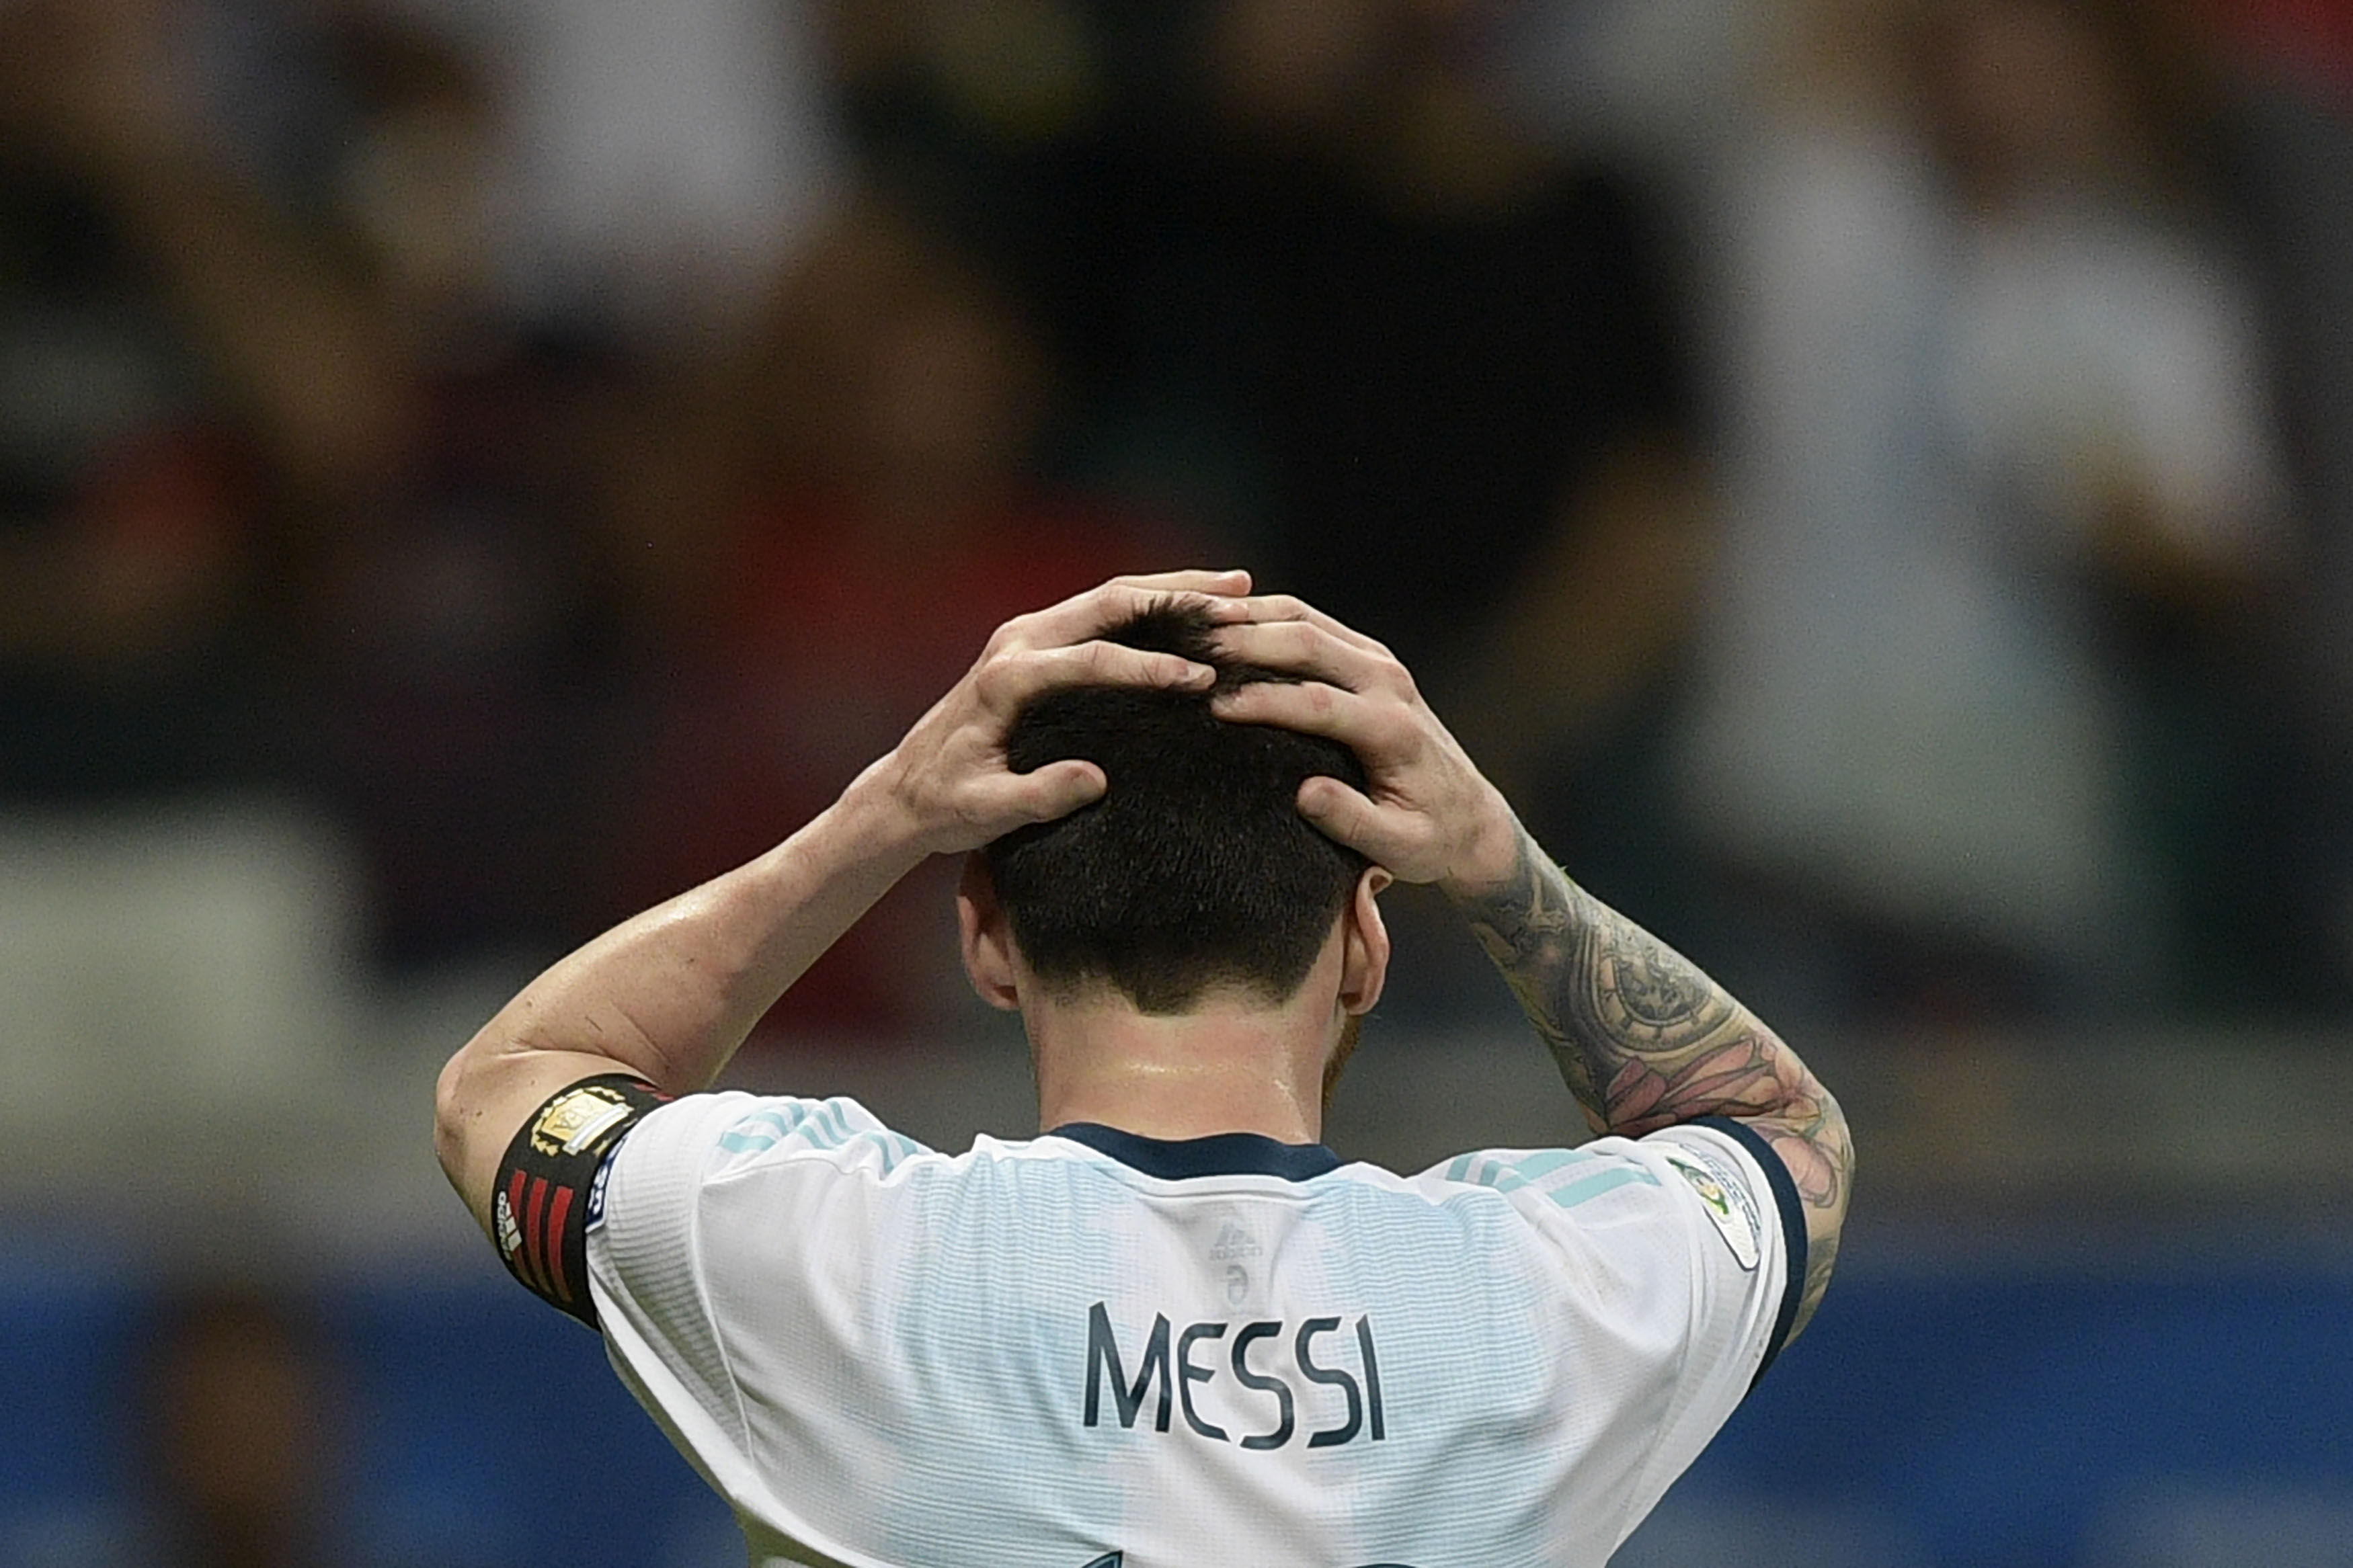 World Cup success has eluded Messi. (Photo by Juan Mabromata/AFP/Getty Images)